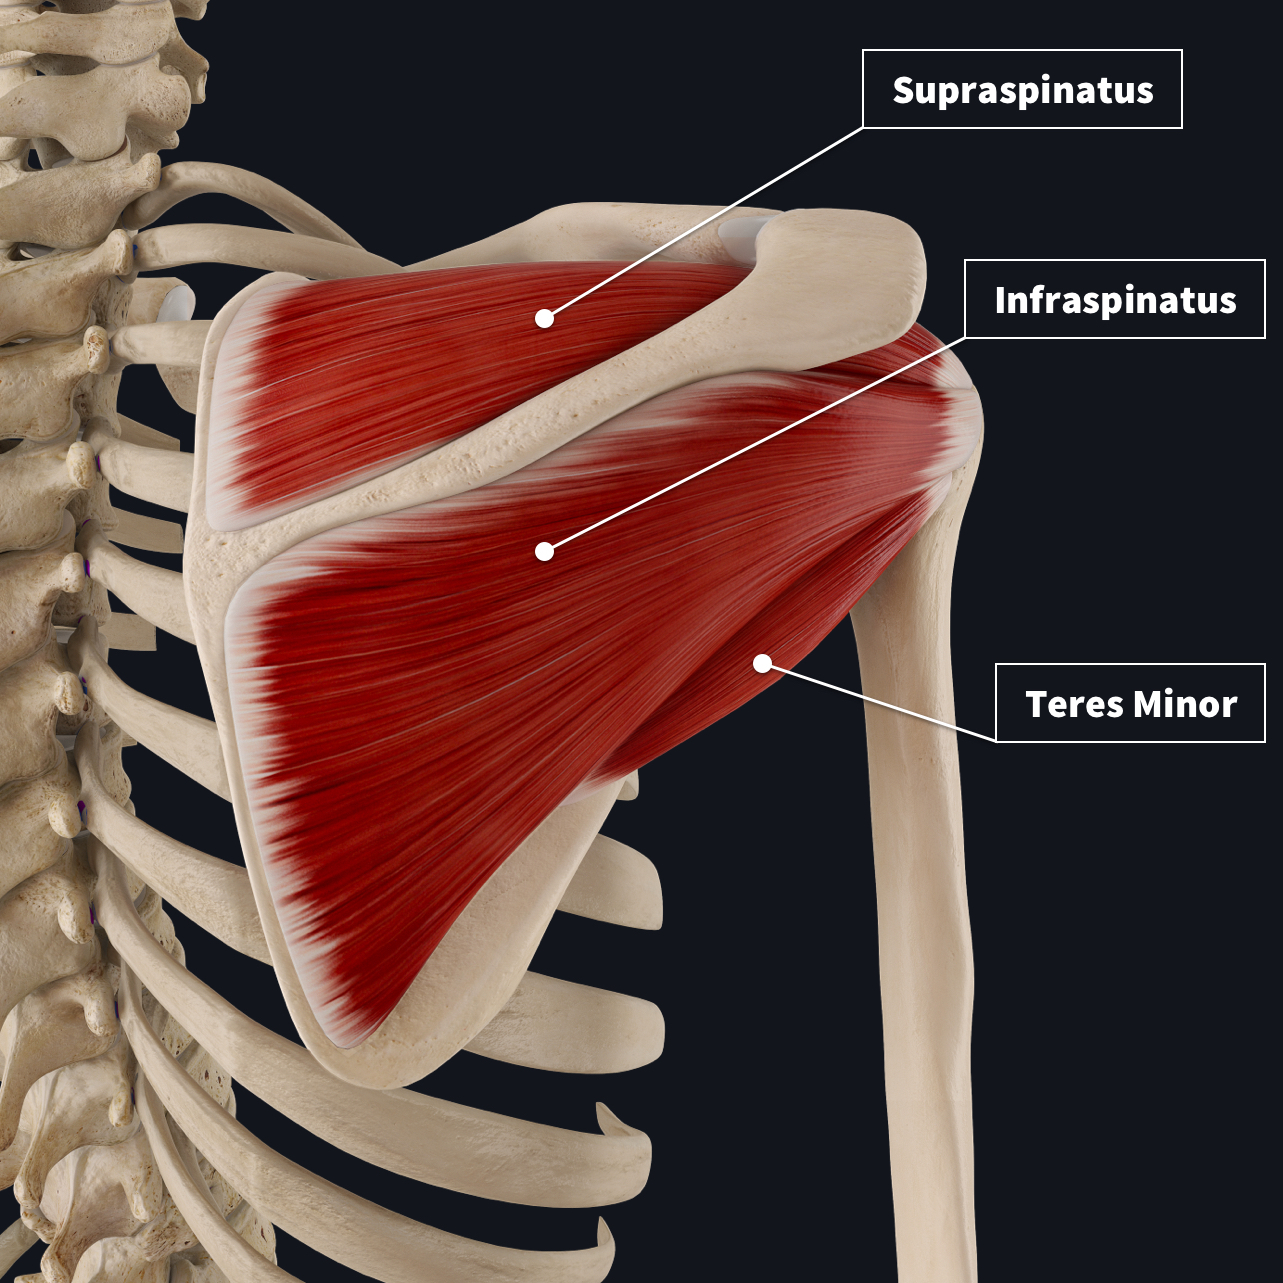 A posterior view of the muscles of the rotator cuff including the Supraspinatus, Infraspinatus and Teres Minor muscles